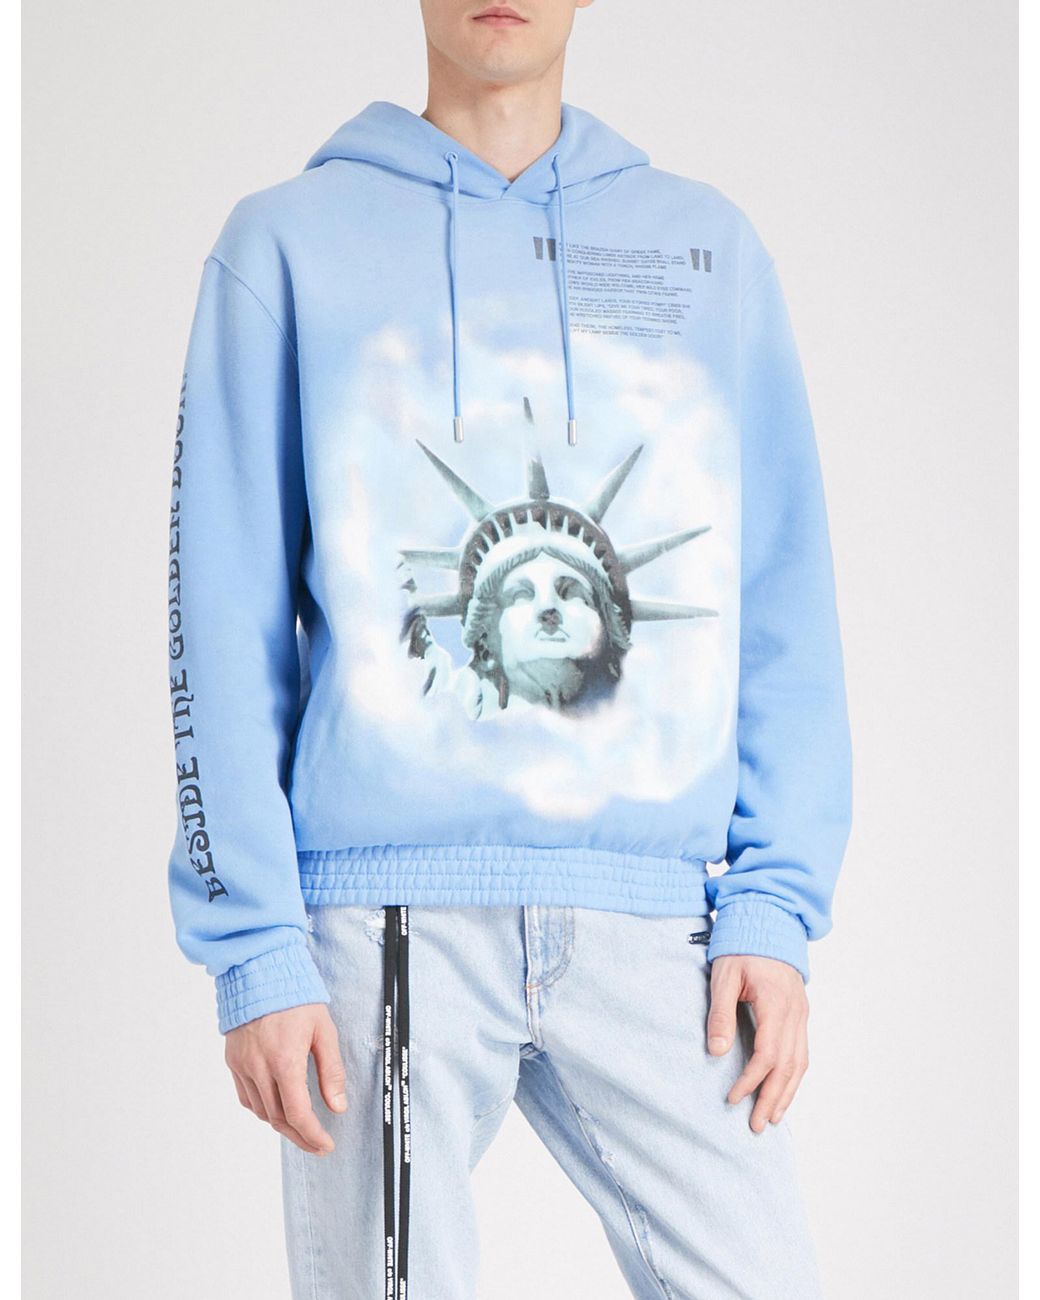 Off-White c/o Virgil Abloh Statue Of Liberty Hoodie in Blue for